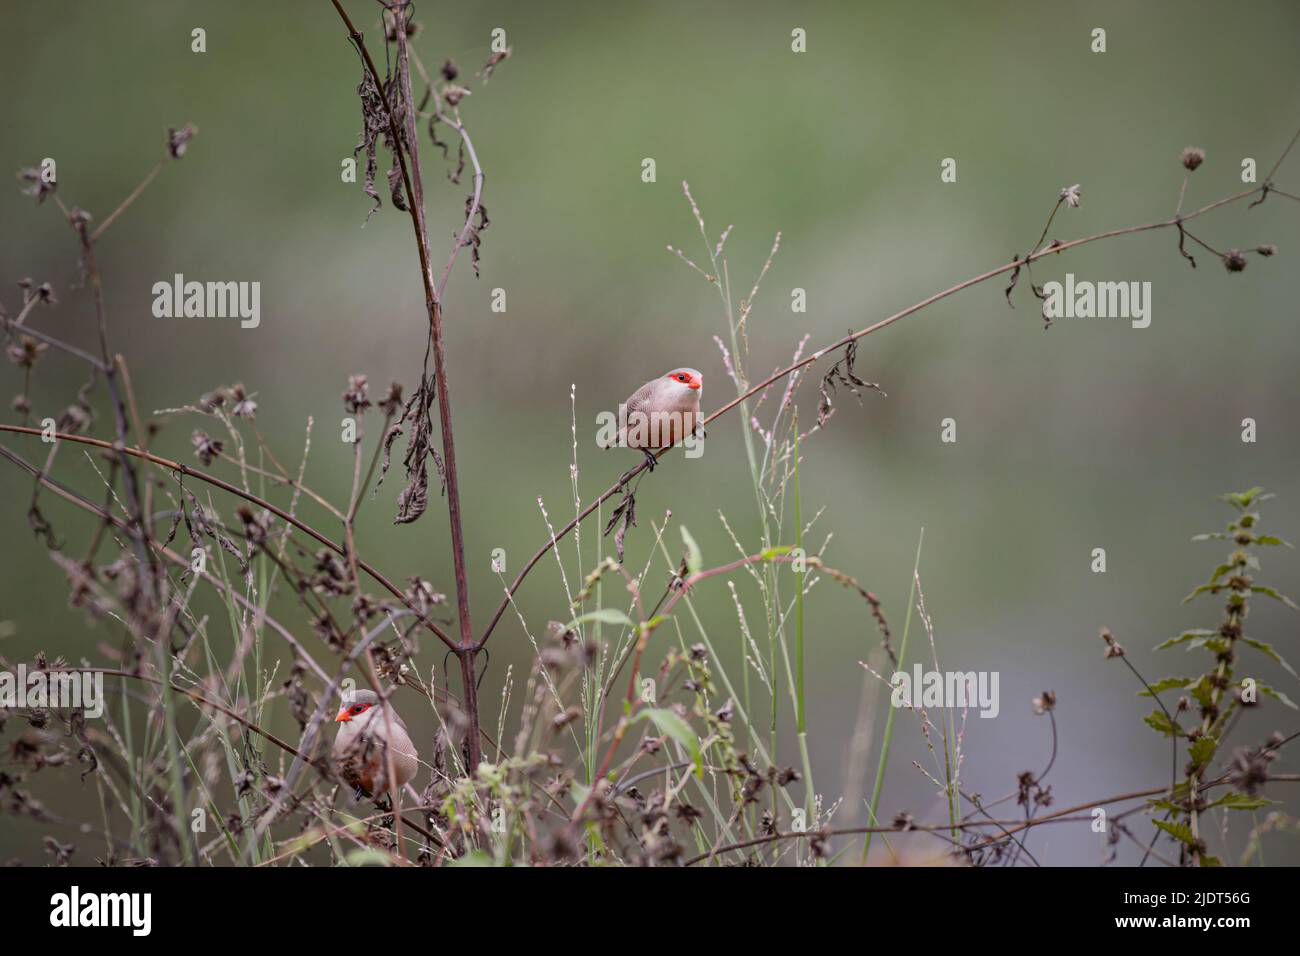 Common waxbills looking for food among the grass on the bank of a river Stock Photo